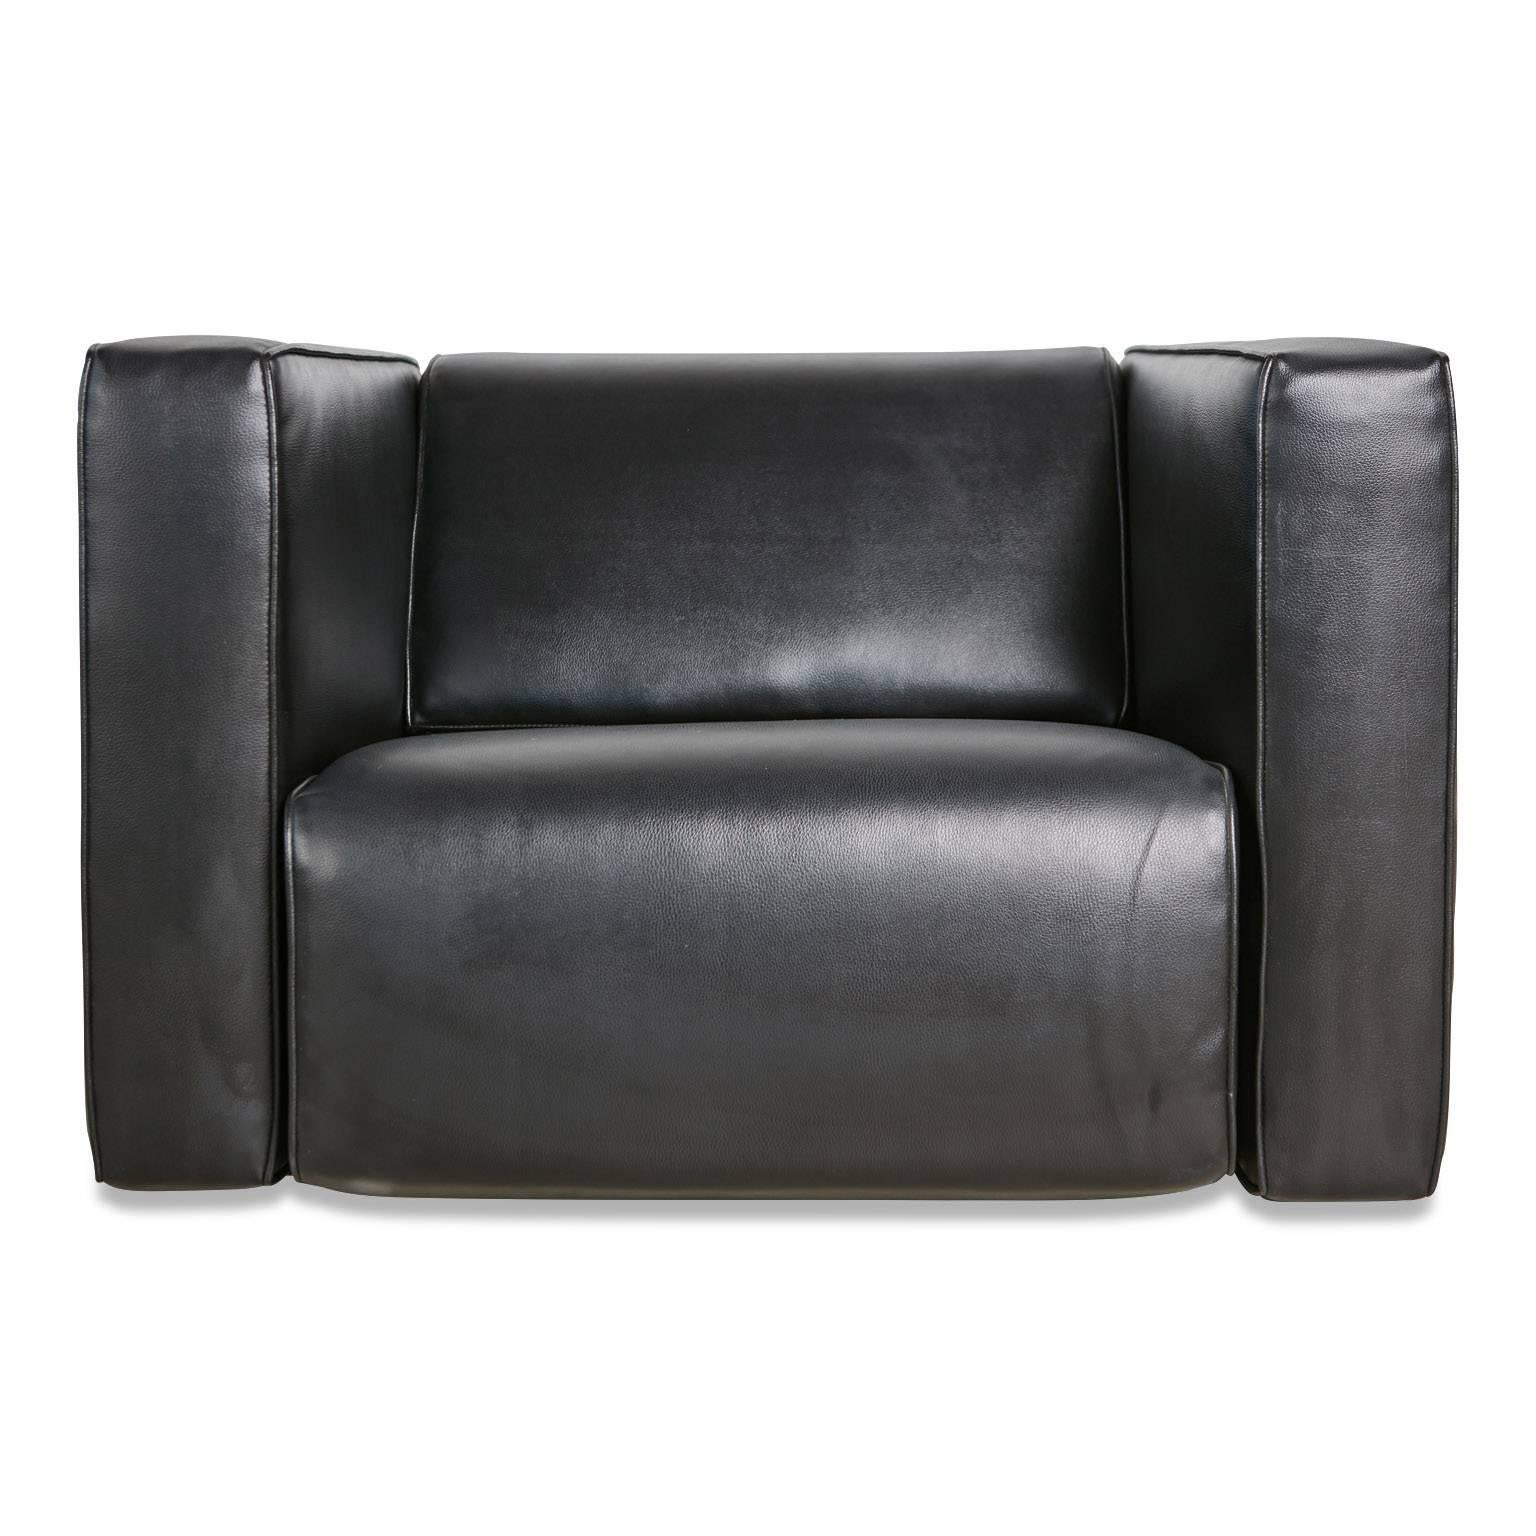 Substantial, deep seated, cube shaped Brazilian club chairs with black leather upholstery and polished chrome band detail. Similar in style to Le Corbusier's LC2 lounge chairs for Cassina, these extremely comfortable chairs are the epitome of cool.